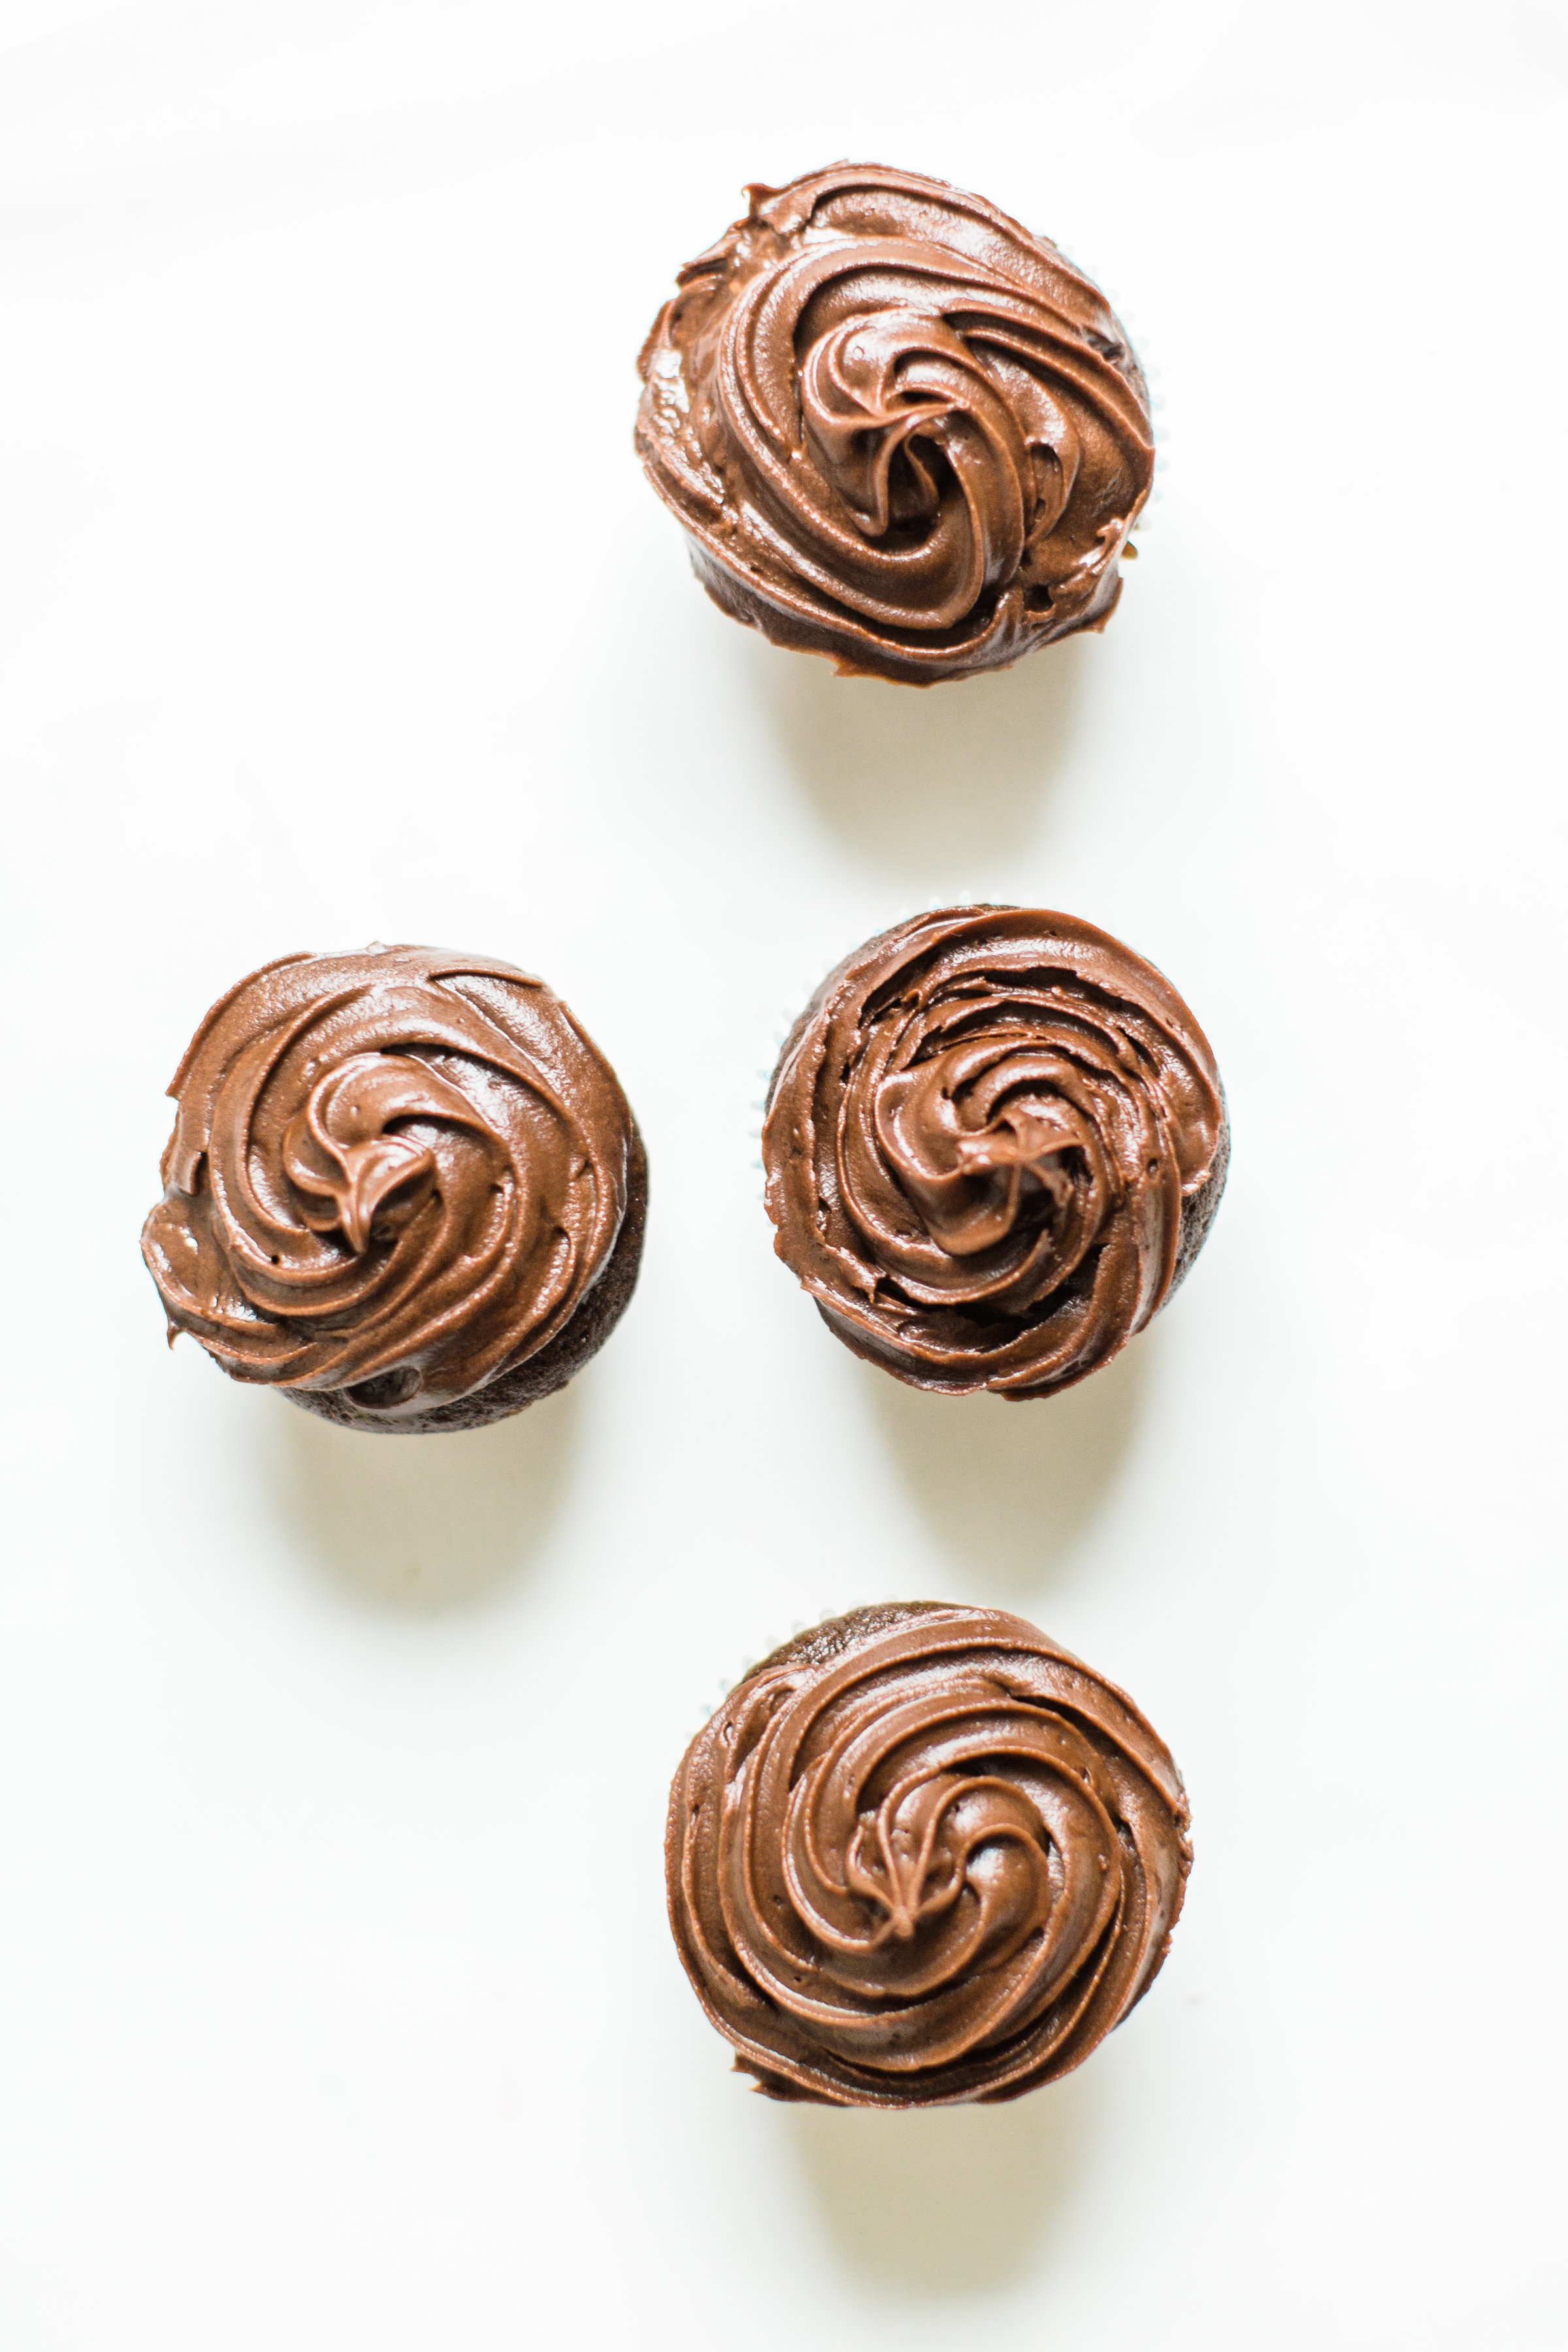 Make these fluffy, moist, and delicious chocolate cupcakes with our favorite chocolate crazy cake recipe. These easy egg-free and dairy-free cupcakes are perfect for your next party! | glitterinc.com | @glitterinc